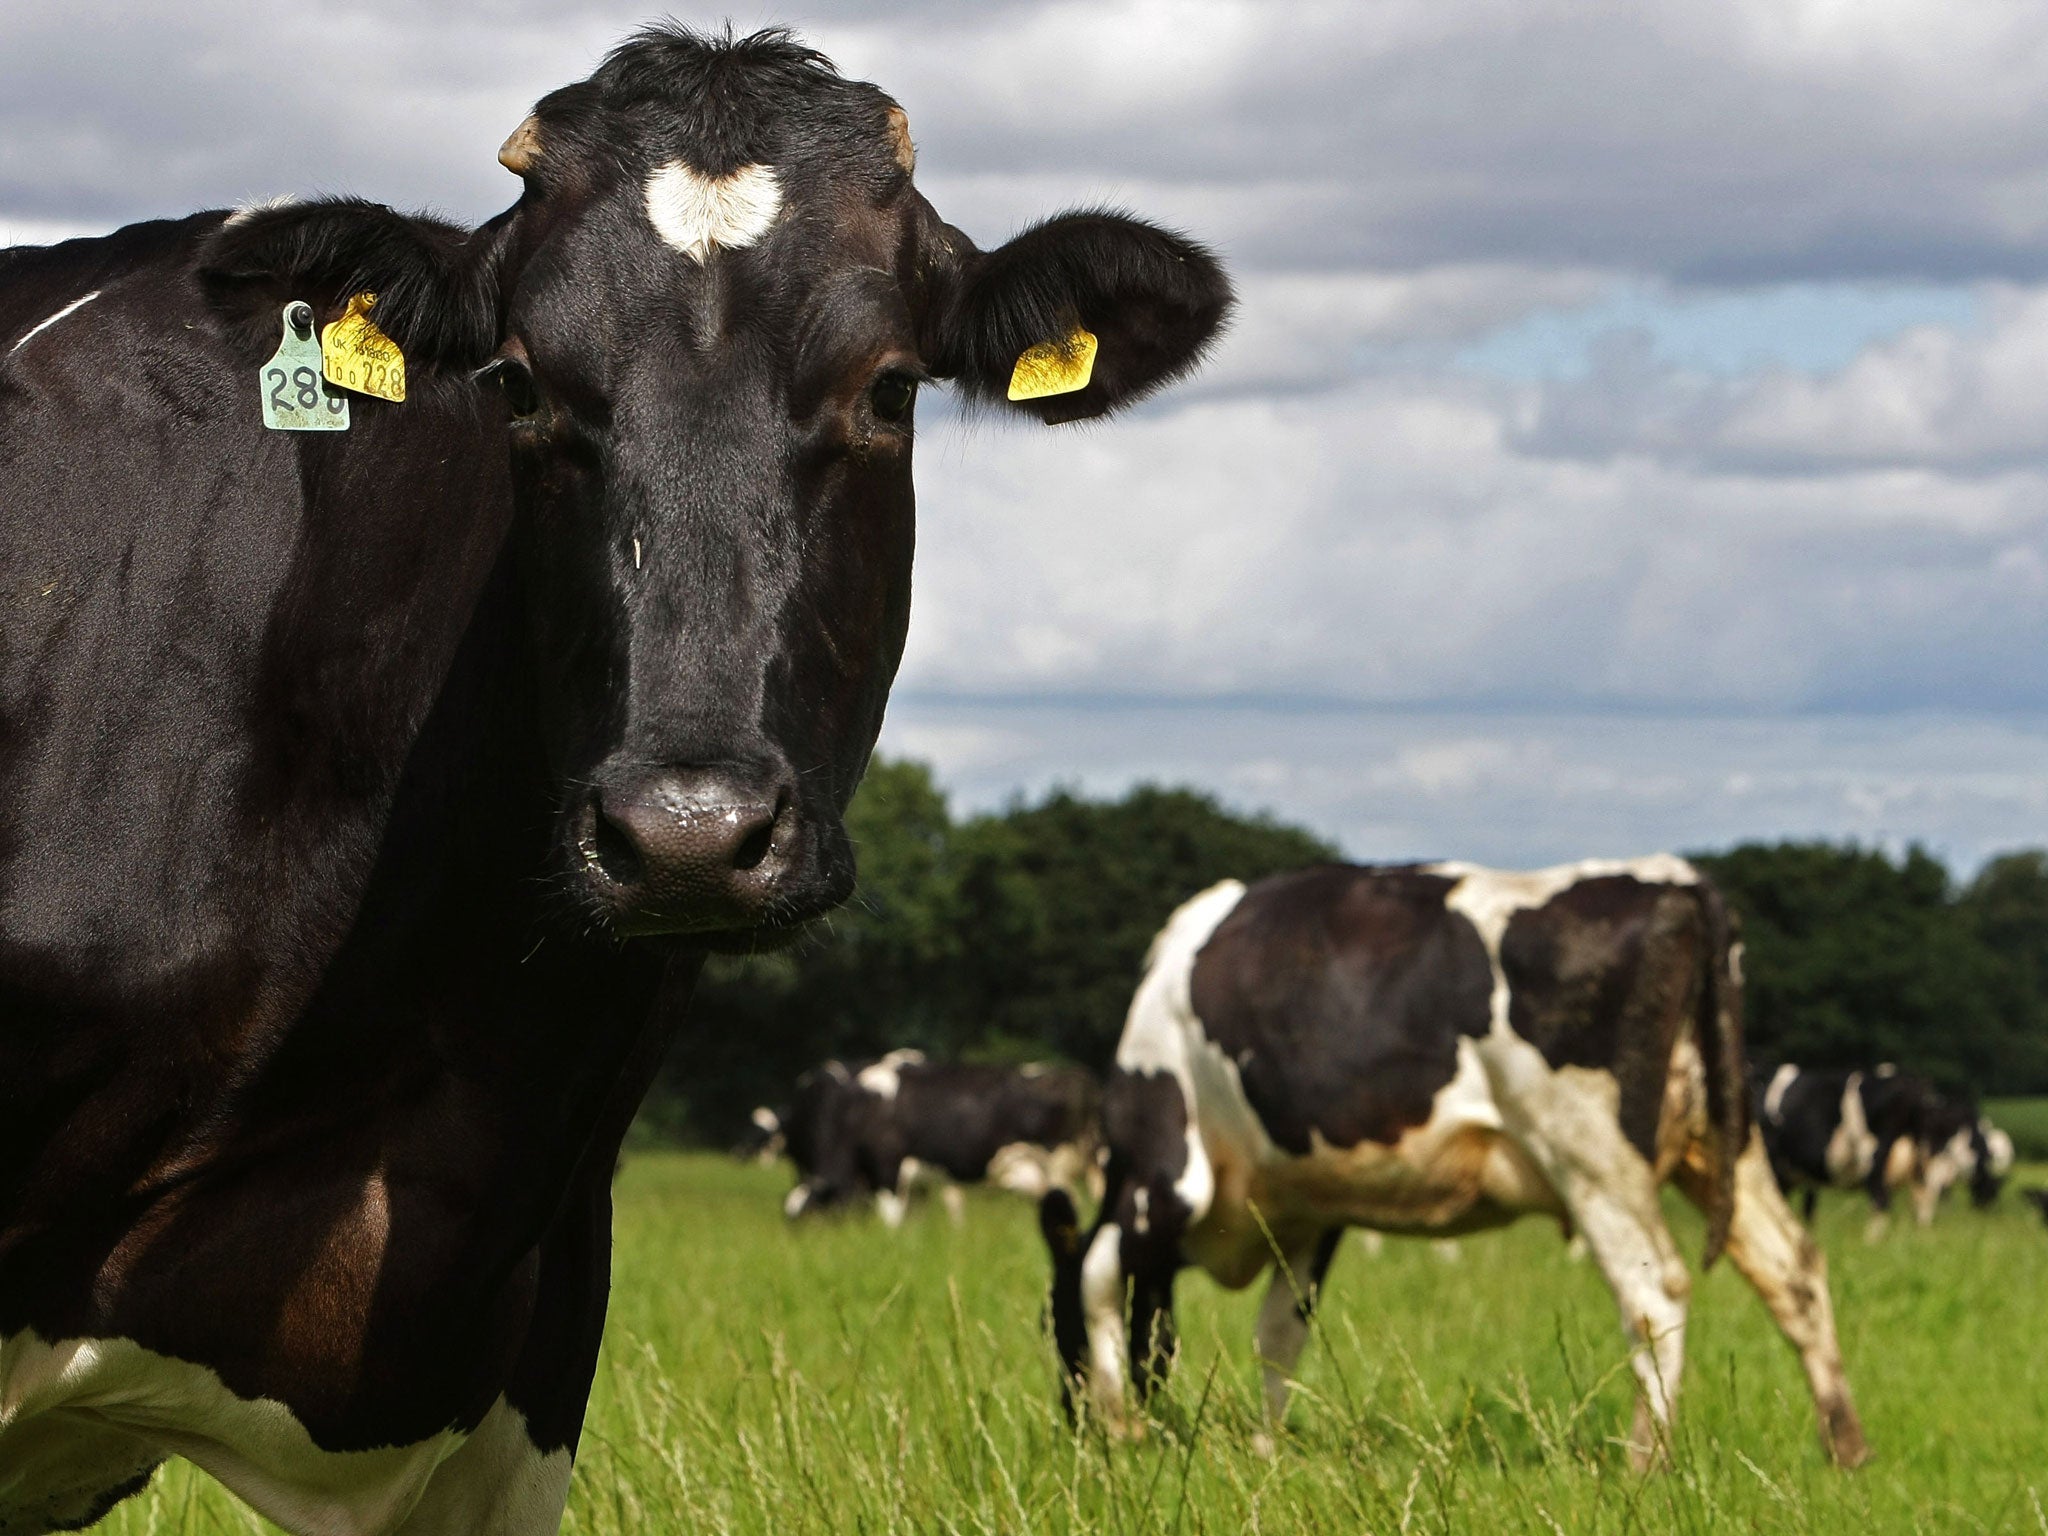 Cows poo can be turned into clean water